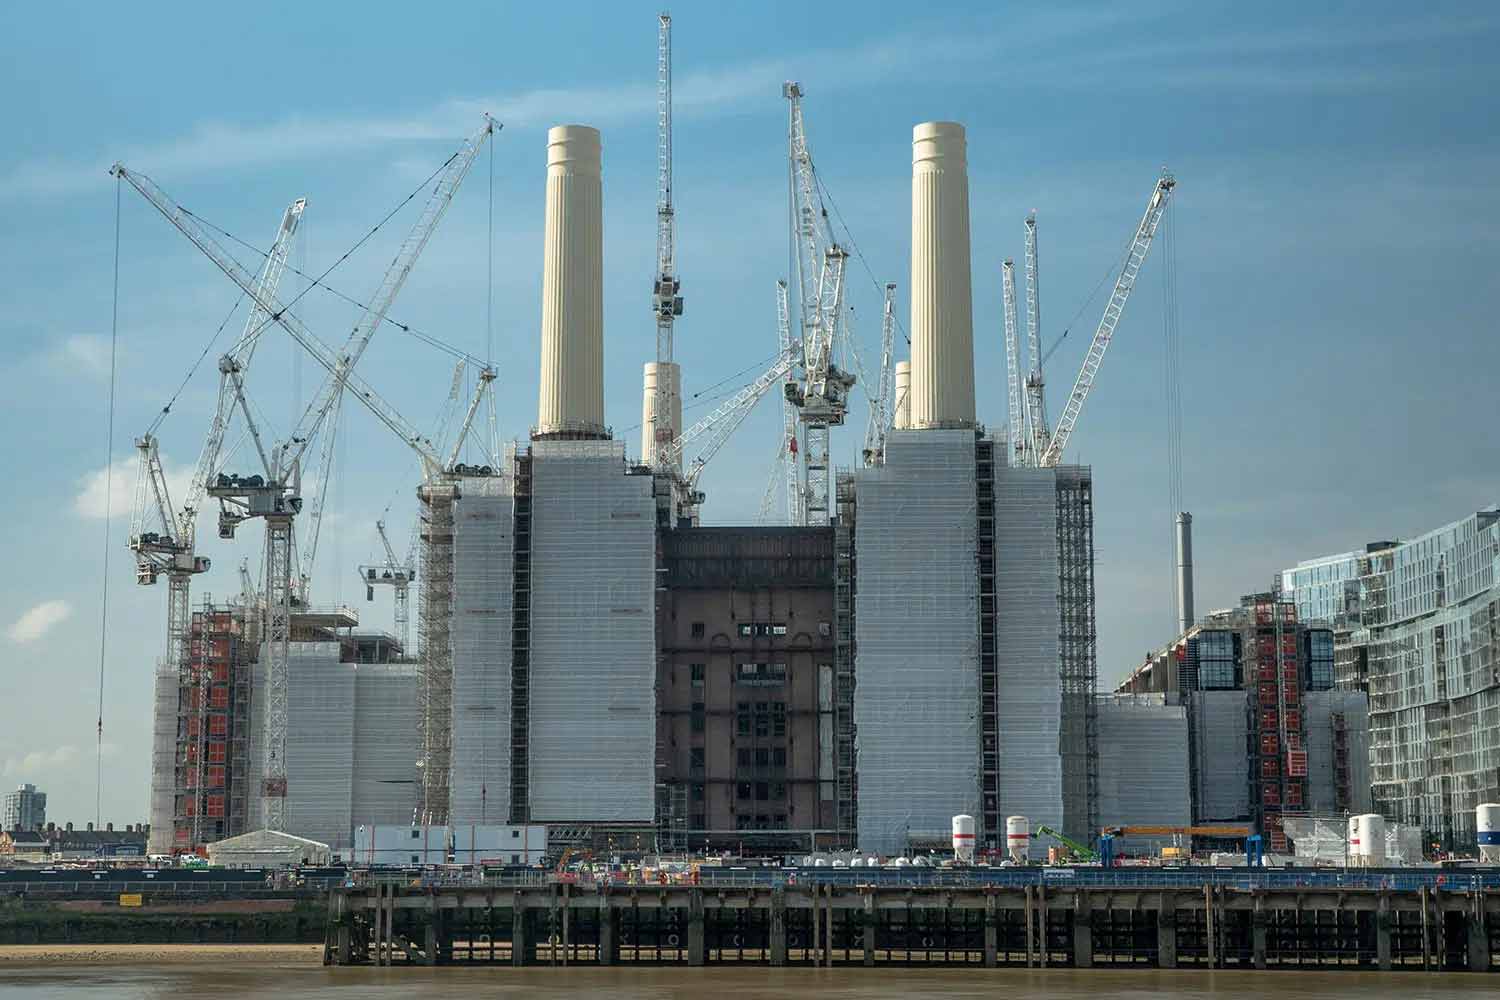 MEP Modelling Services, BIM Coordination and Shop Drawings for Battersea Power Station, UK